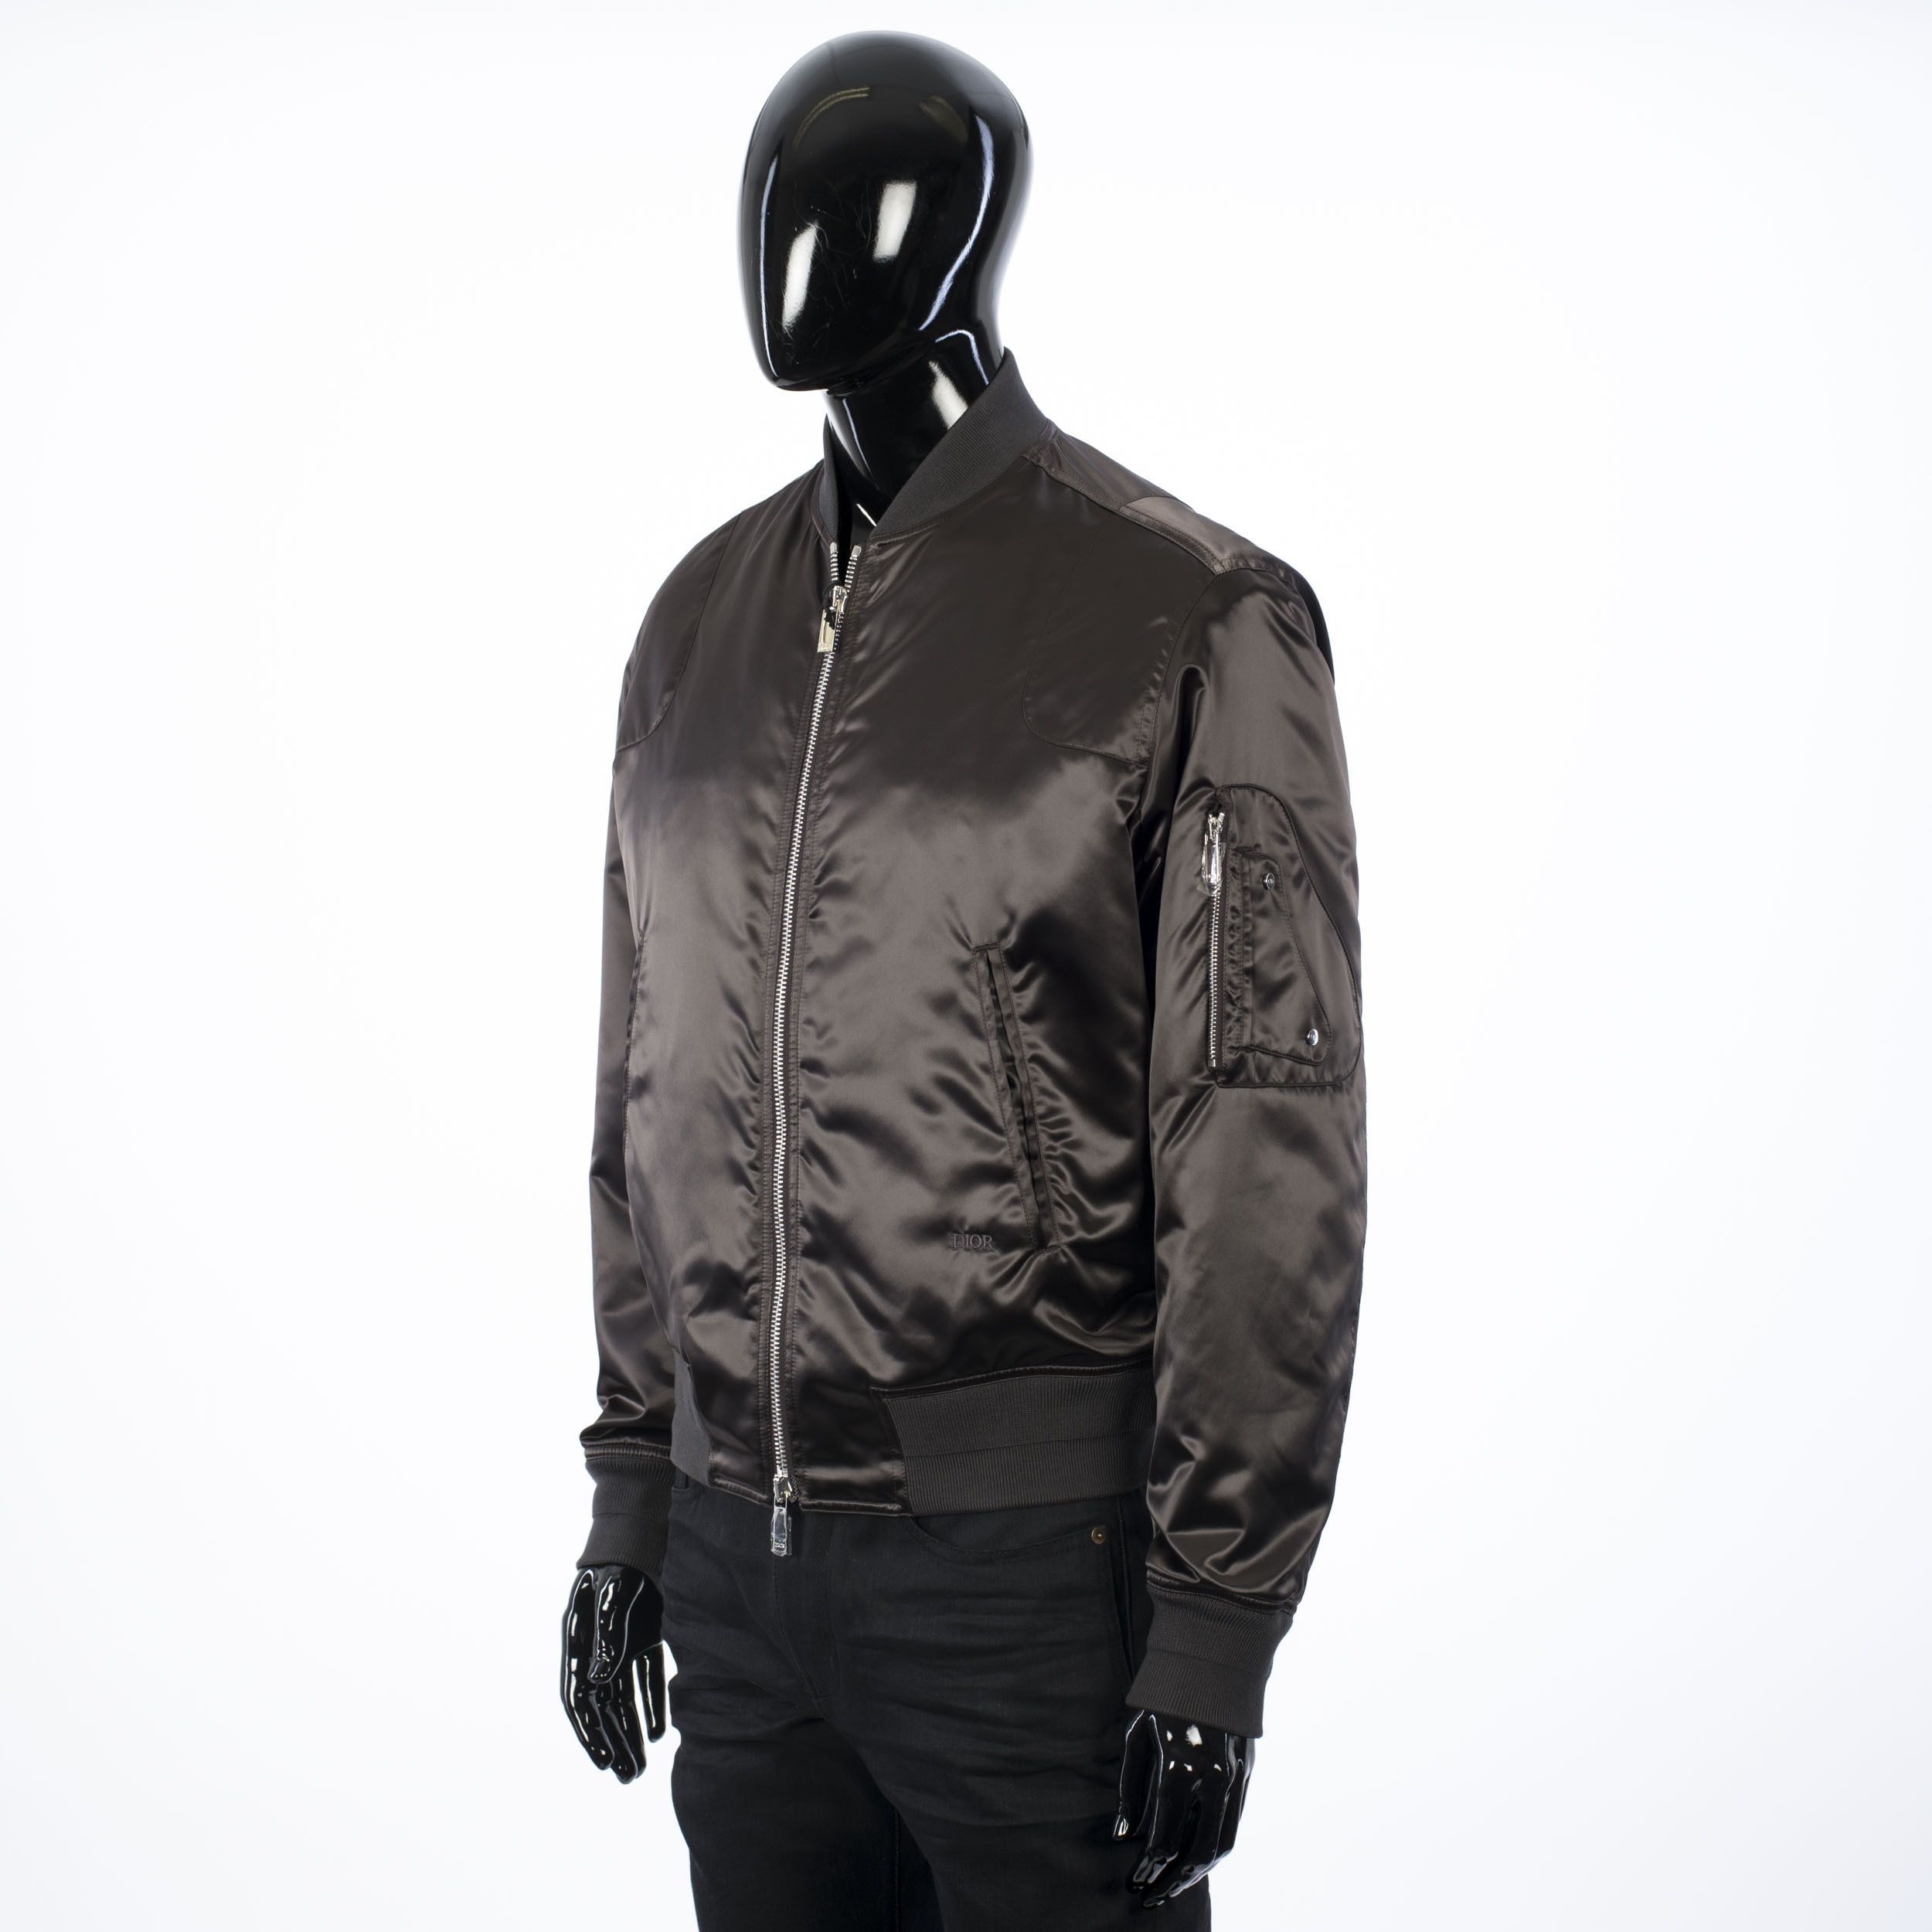 Dior 3500$ Nylon Bomber Jacket With Saddle Pocket In Anthracite Size US L / EU 52-54 / 3 - 2 Preview